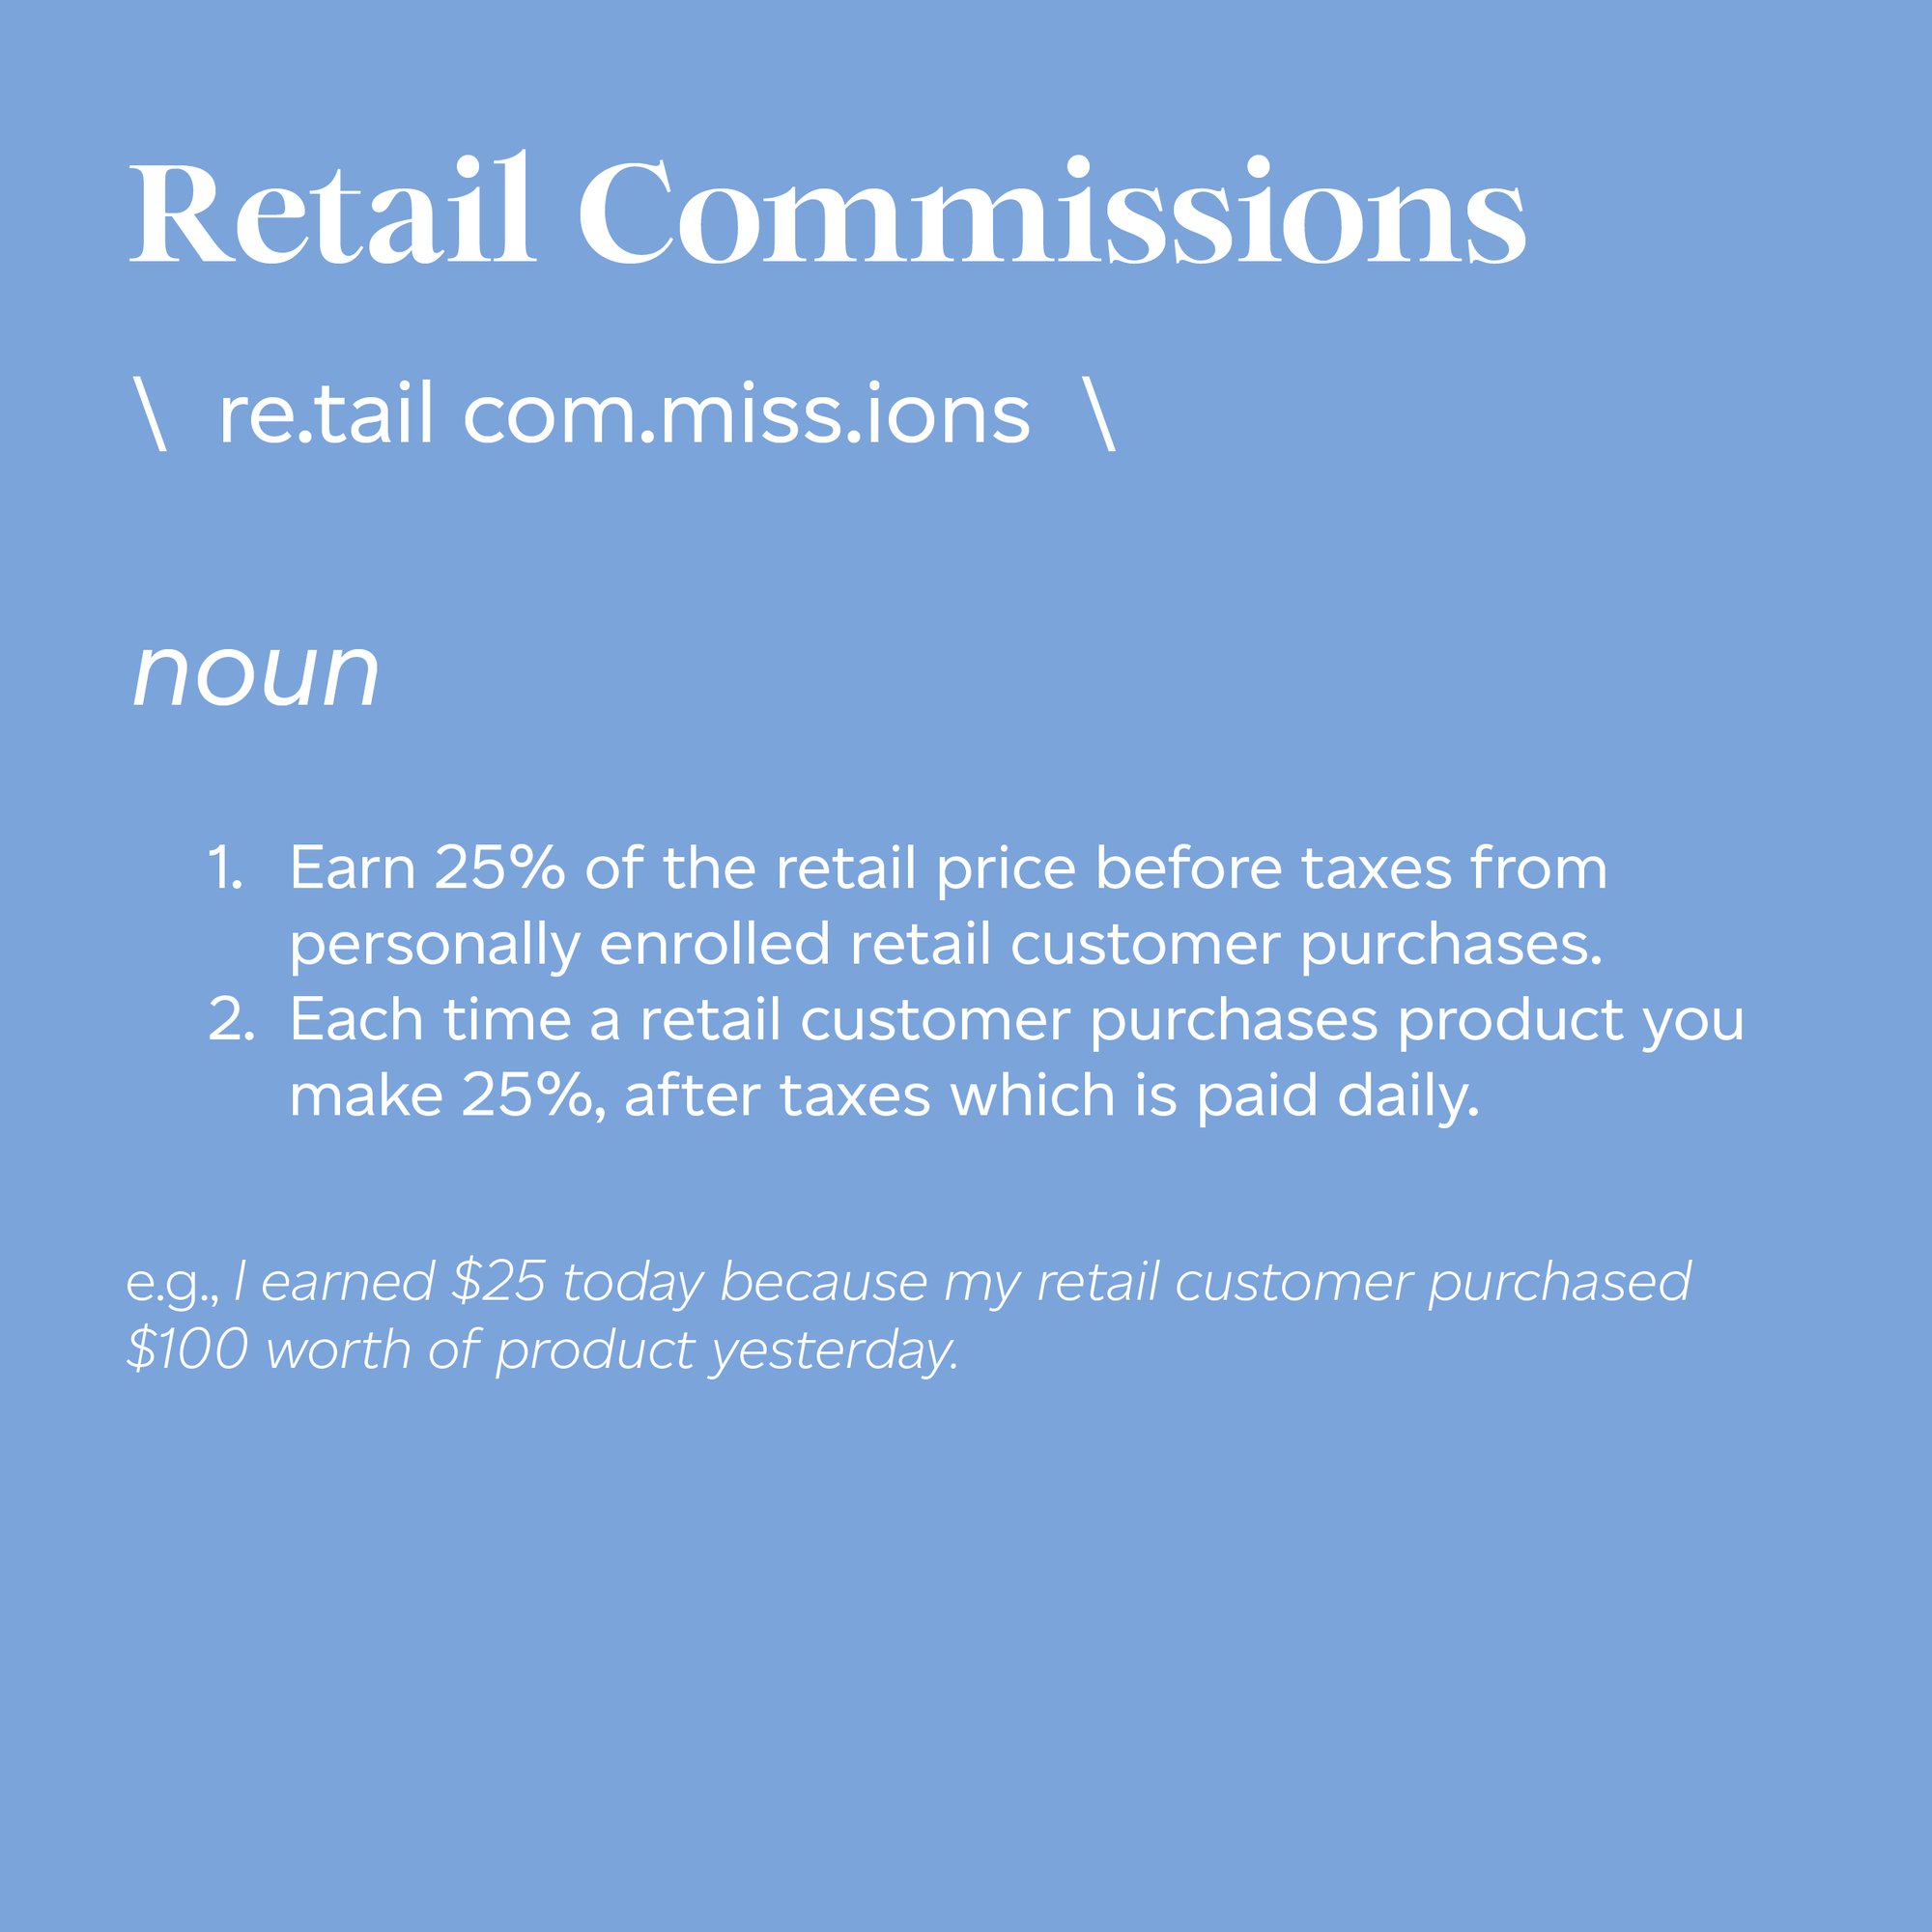 RETAIL COMMISSIONS